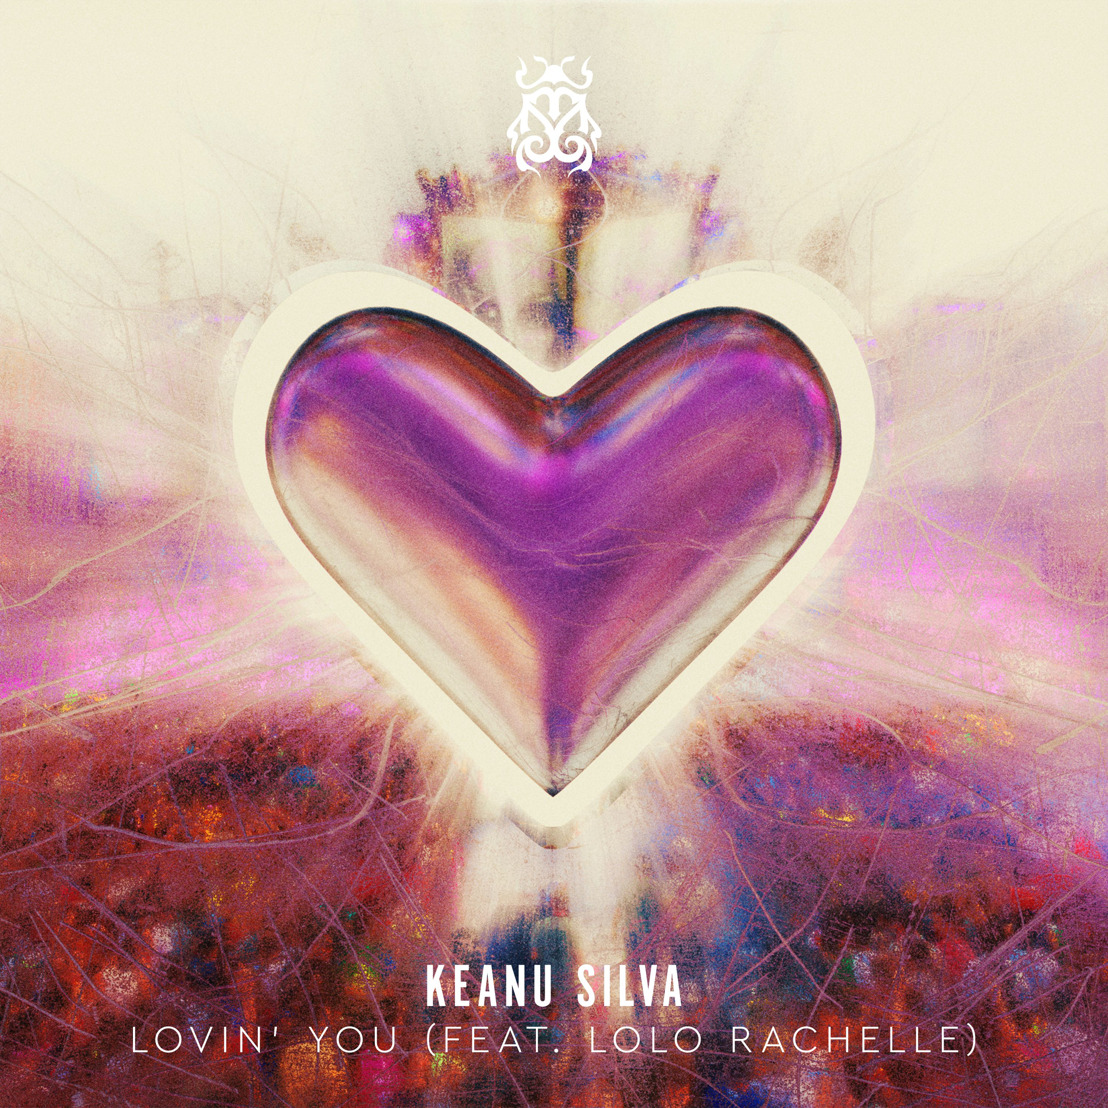 Keanu Silva reveals his brand-new infectious dance weapon ‘Lovin’ You’